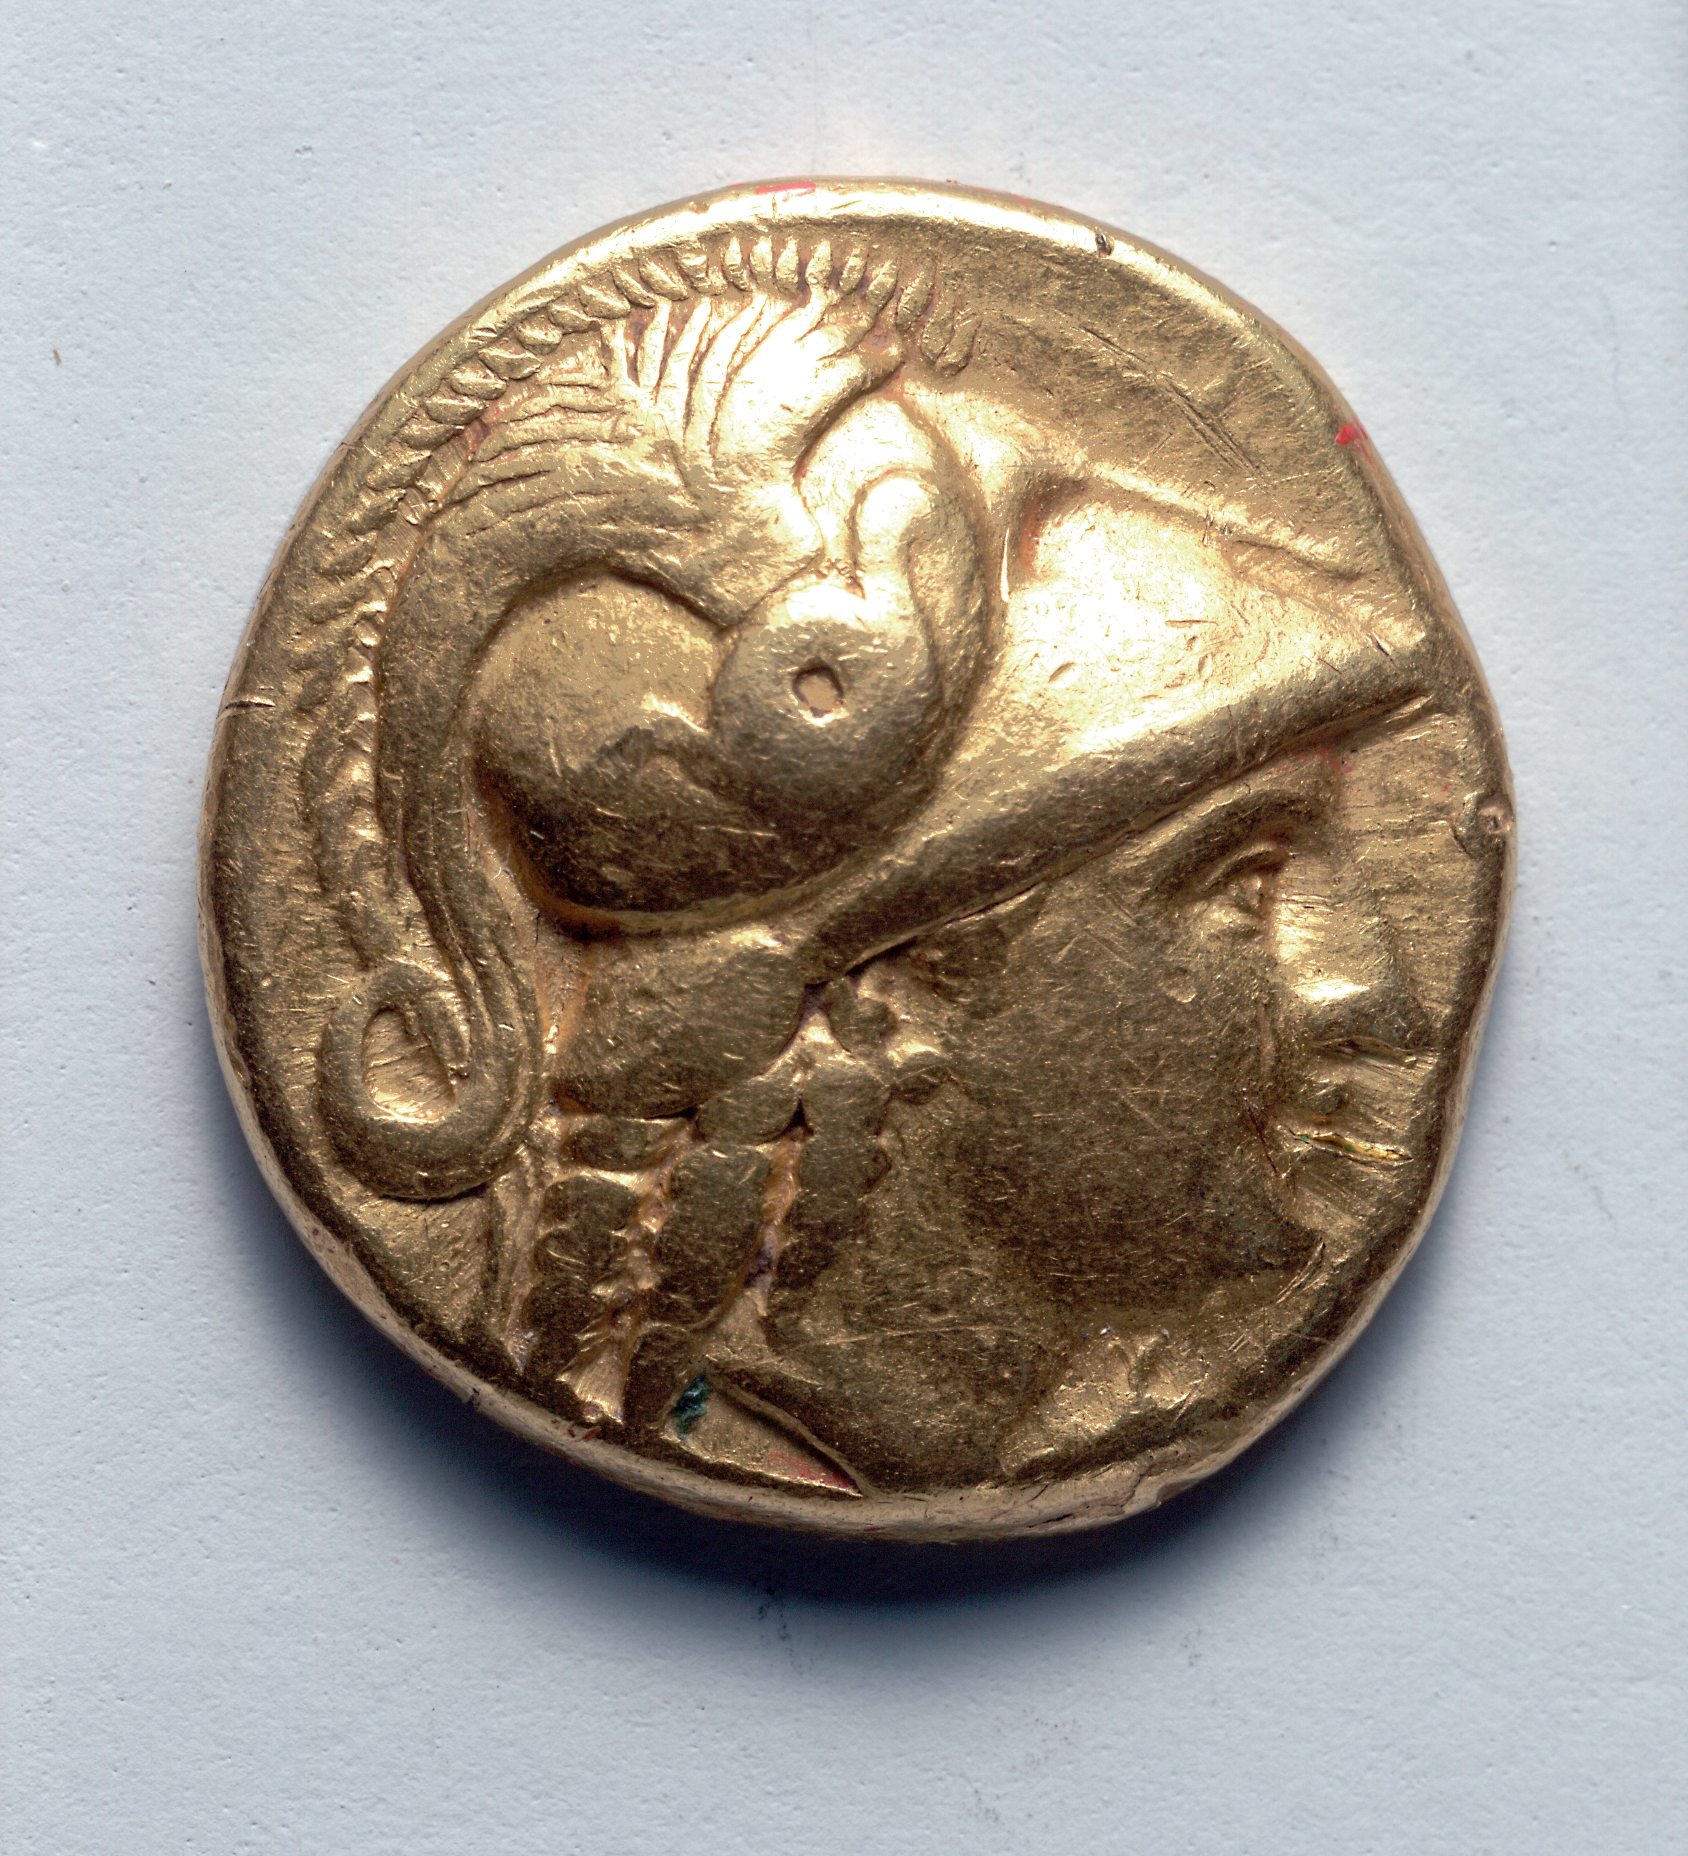 Stater: Head of Athena, r., with crested Corinthian helmet, barley left (obverse)